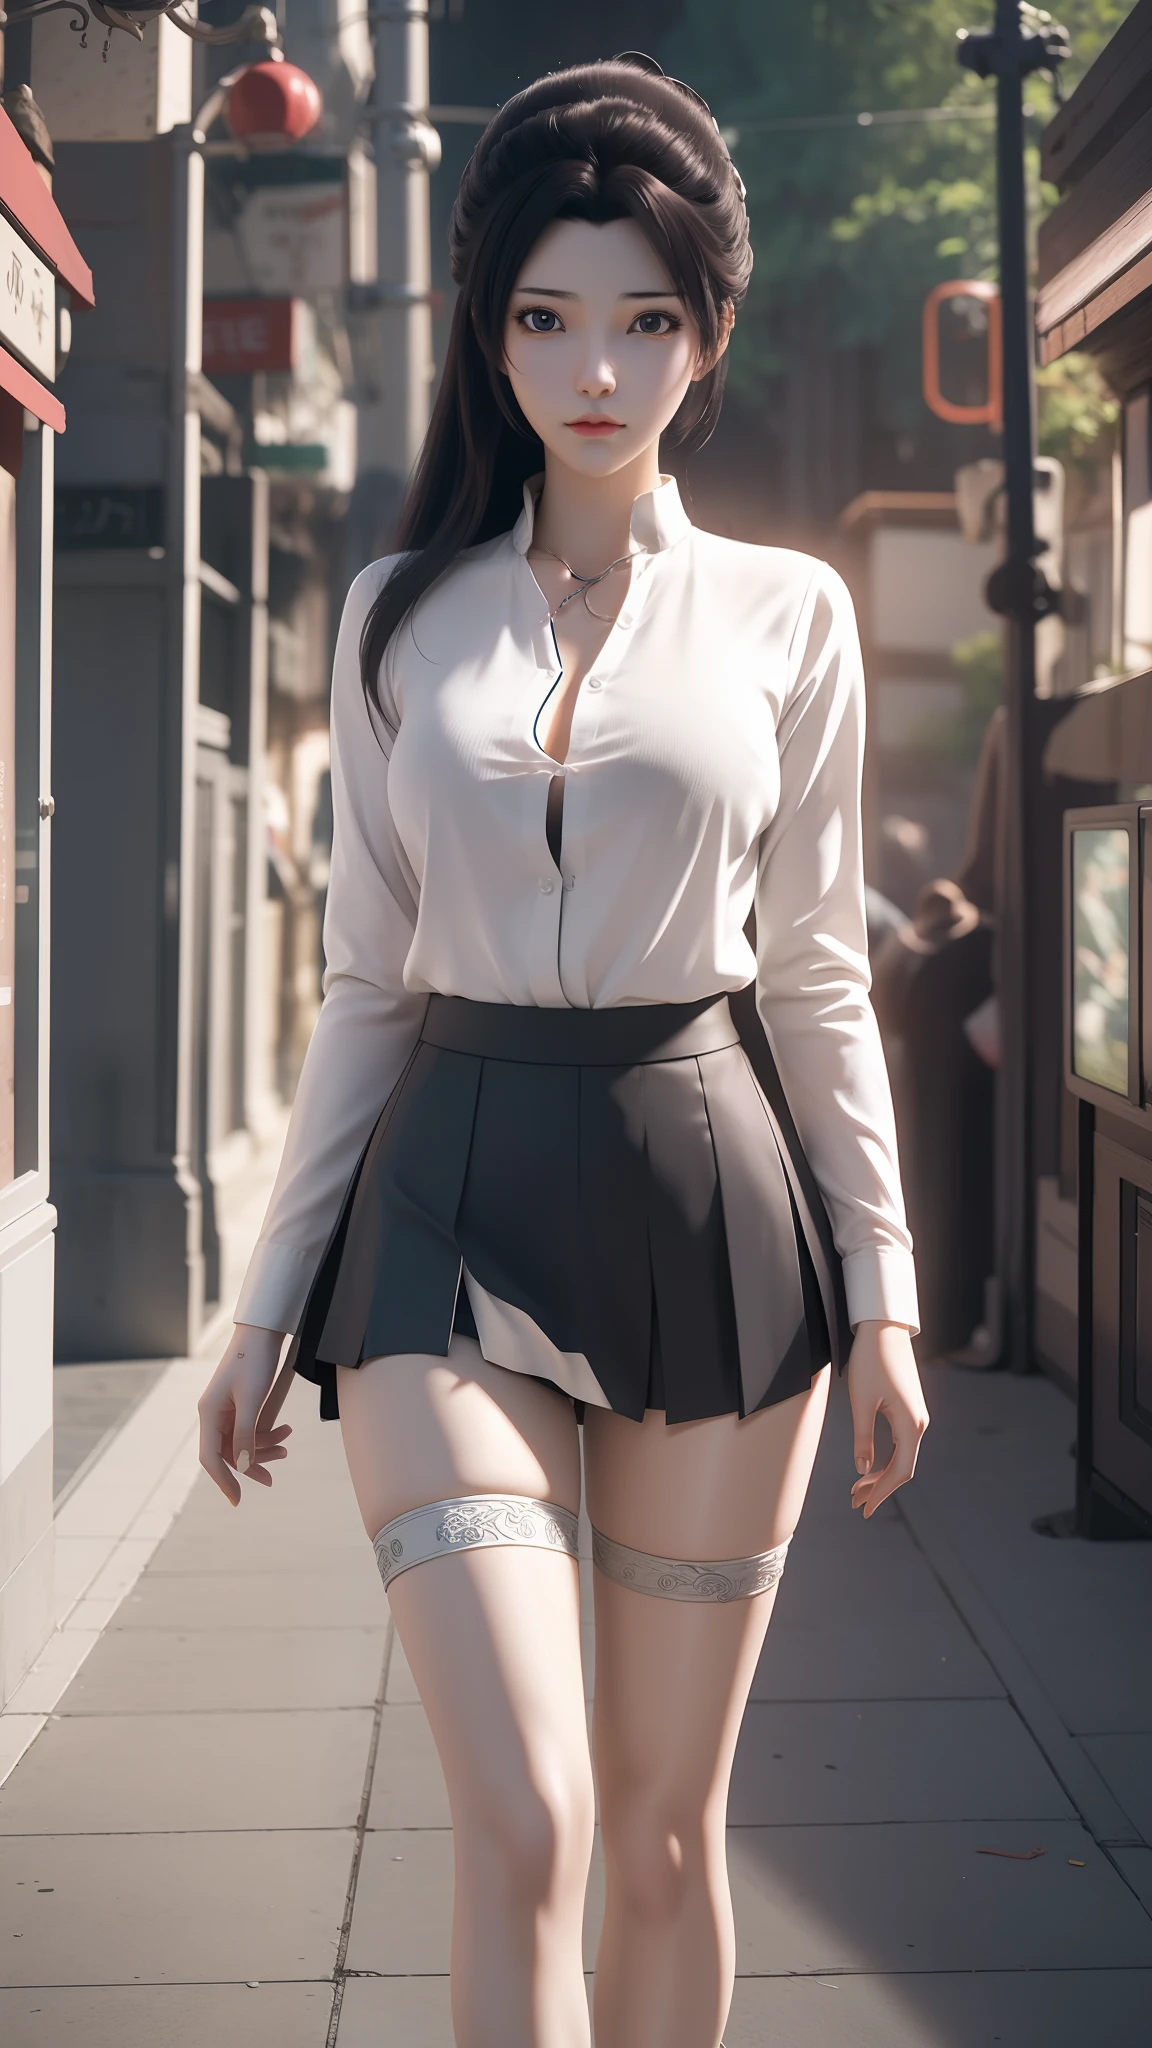 anime - style image of a woman in a short skirt and shirt, seductive anime girls, Smooth anime CG art, Surrealism female students, Surrealism female students, thighhighs and skirt, photorealistic anime girl rendering, beautiful and seductive anime woman, Realistic , Realistic anime 3 D style, 3 d anime realistic, Beautiful Anime High School Girls